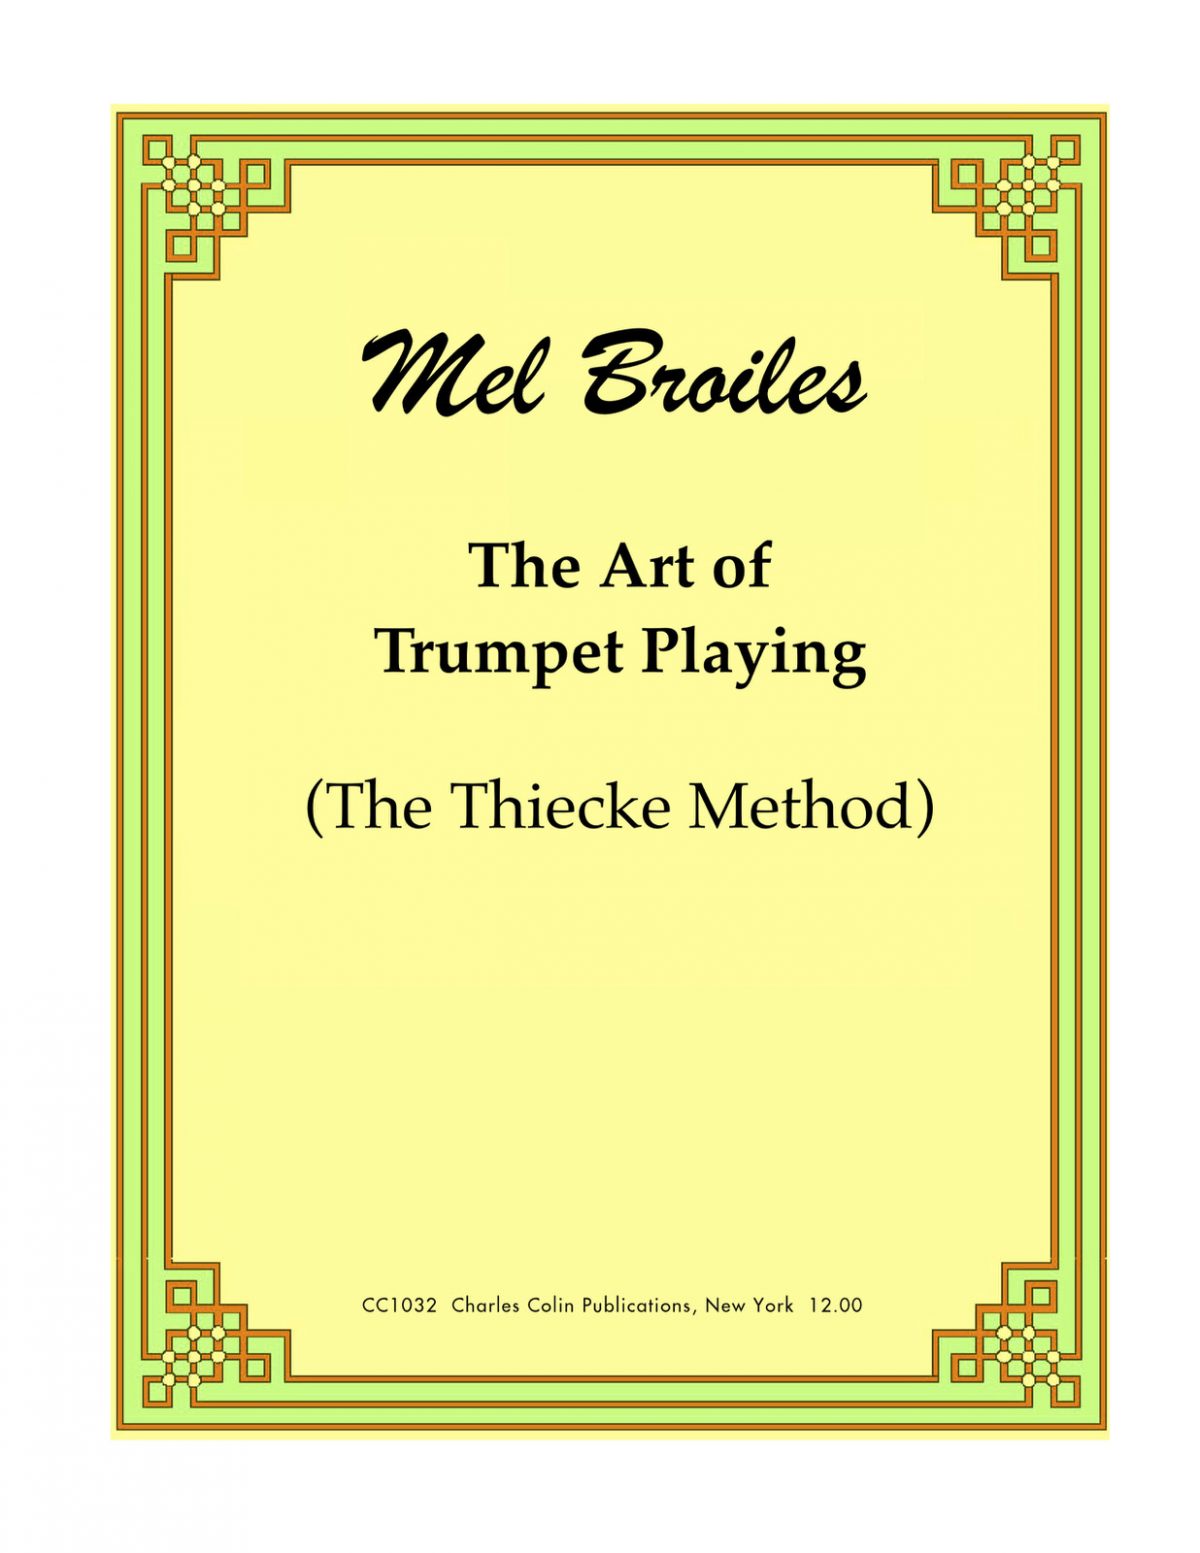 Broiles, The Art of Trumpet Playing PDF